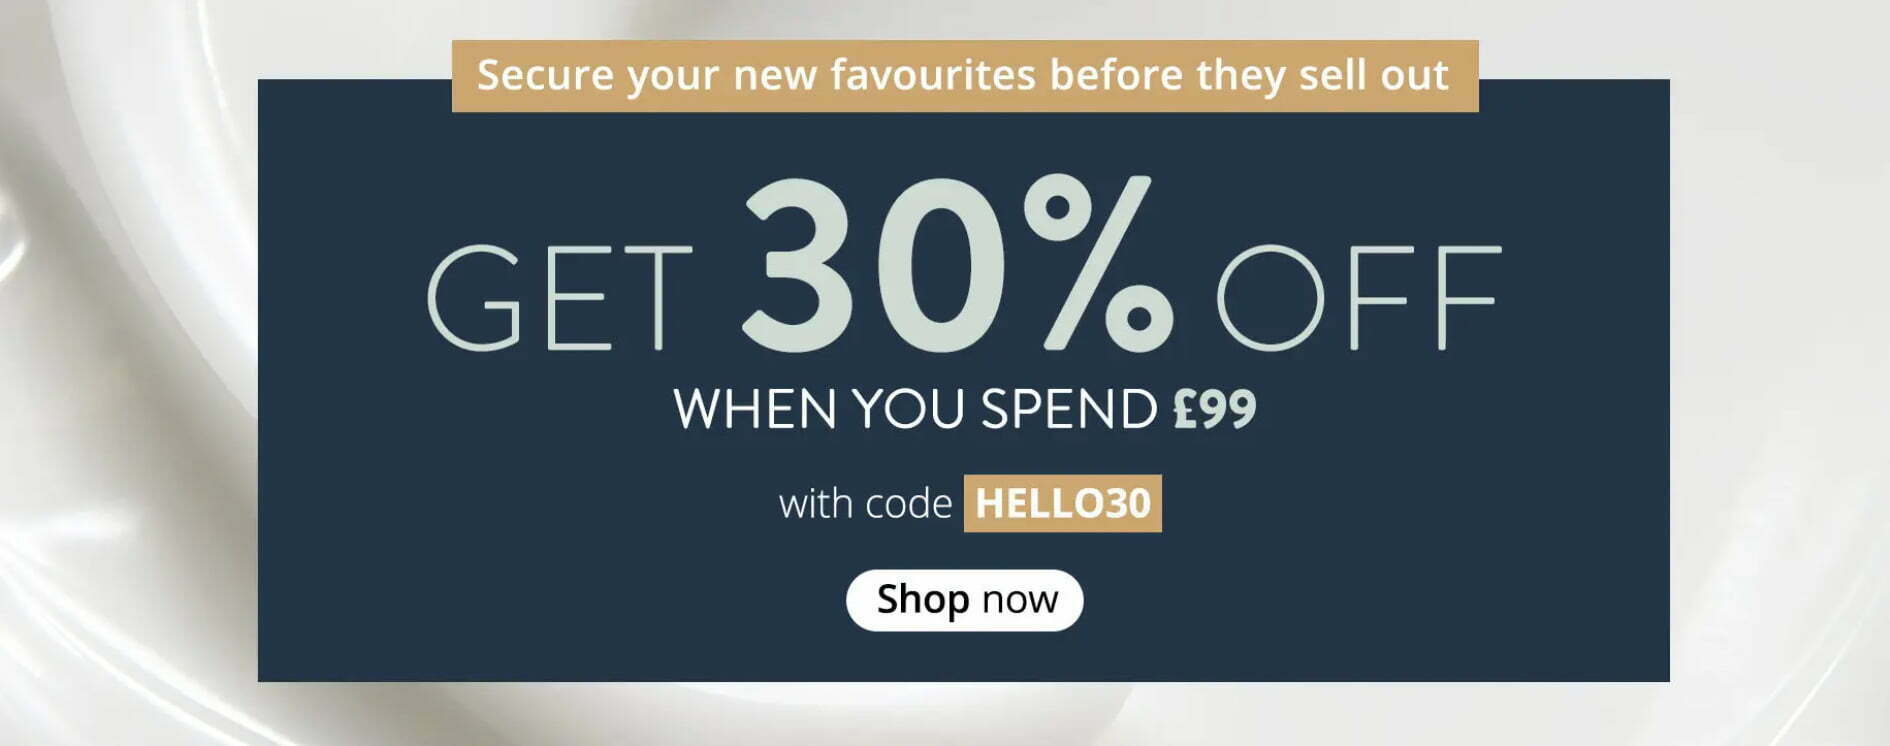 30% off when you spend £99 at Feelunique